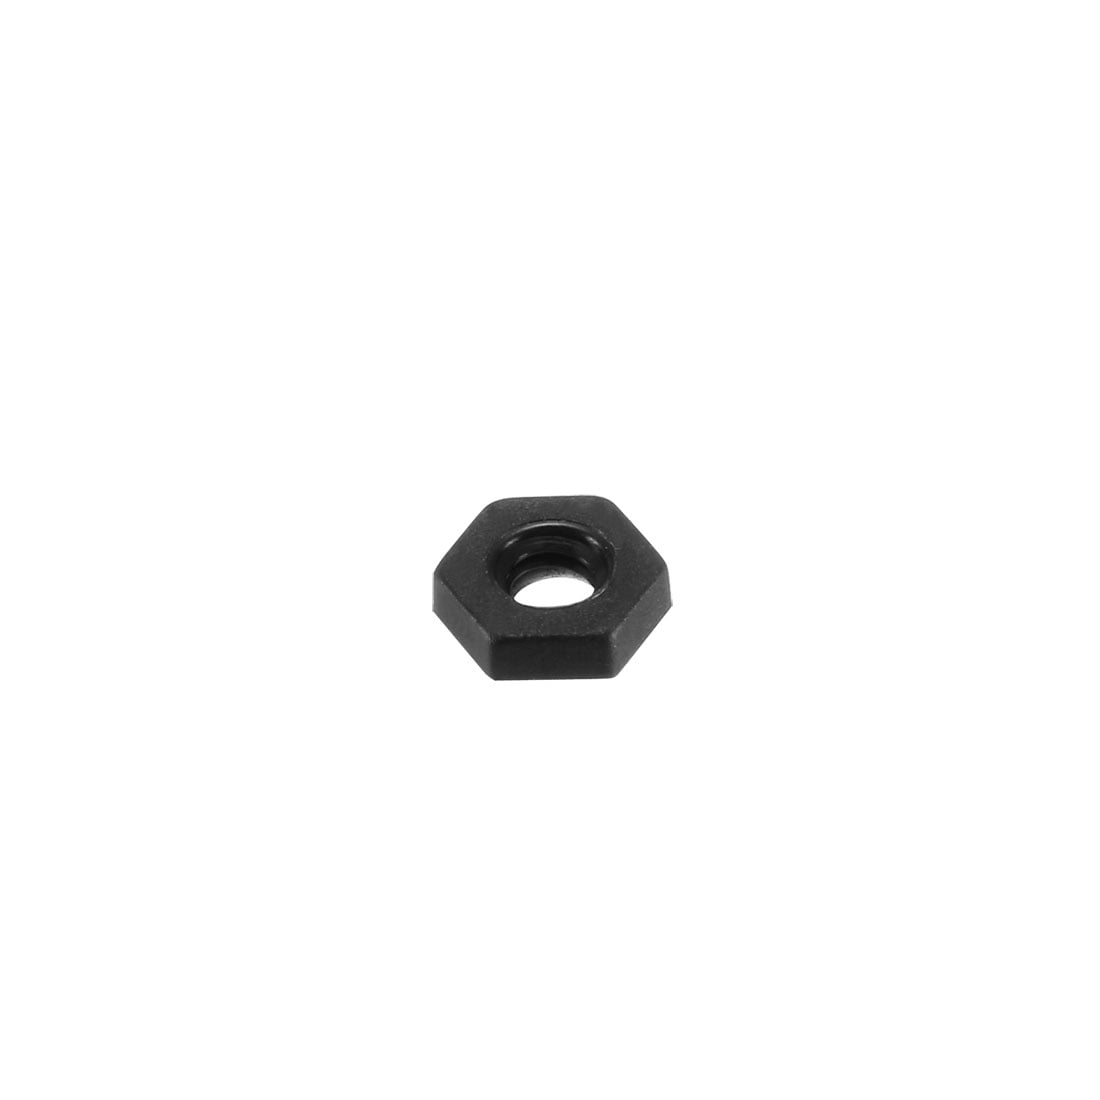 The Hillman Group 2406 10-24 Keps Lock Nut 20-Pack